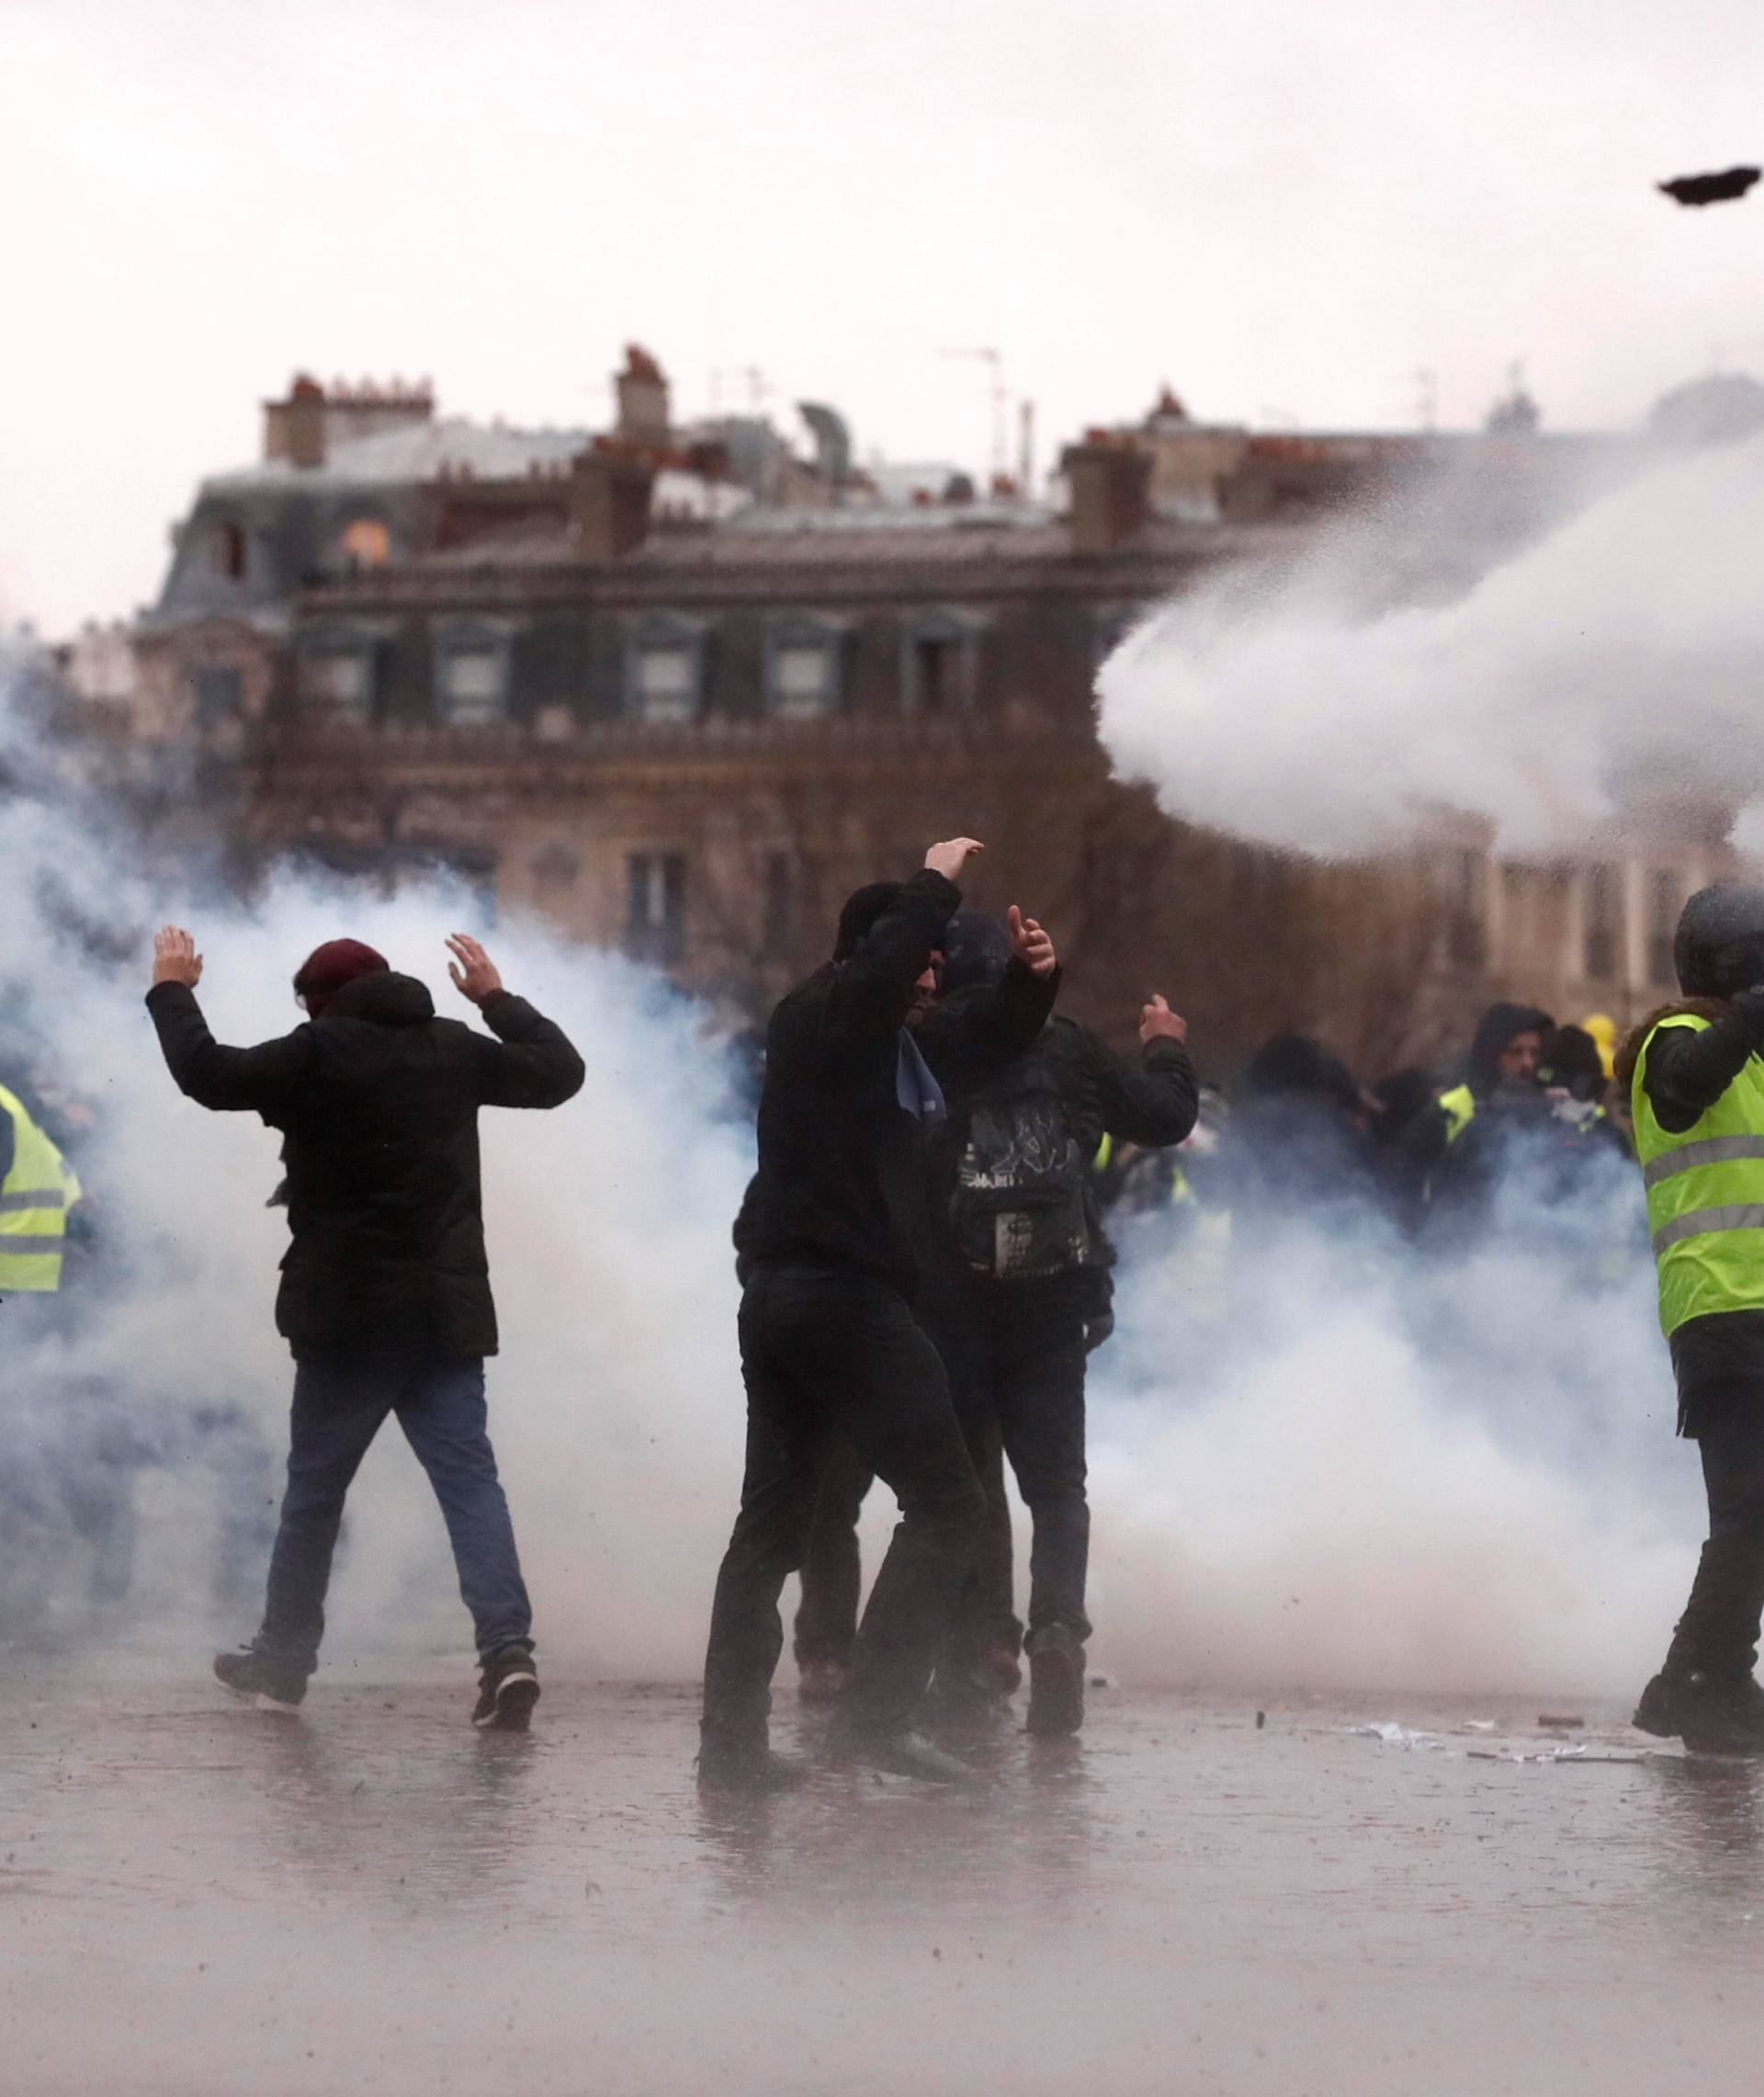 Protesters walk through tear gas during a demonstration of the "yellow vests" movement near the Arc de Triomphe in Paris